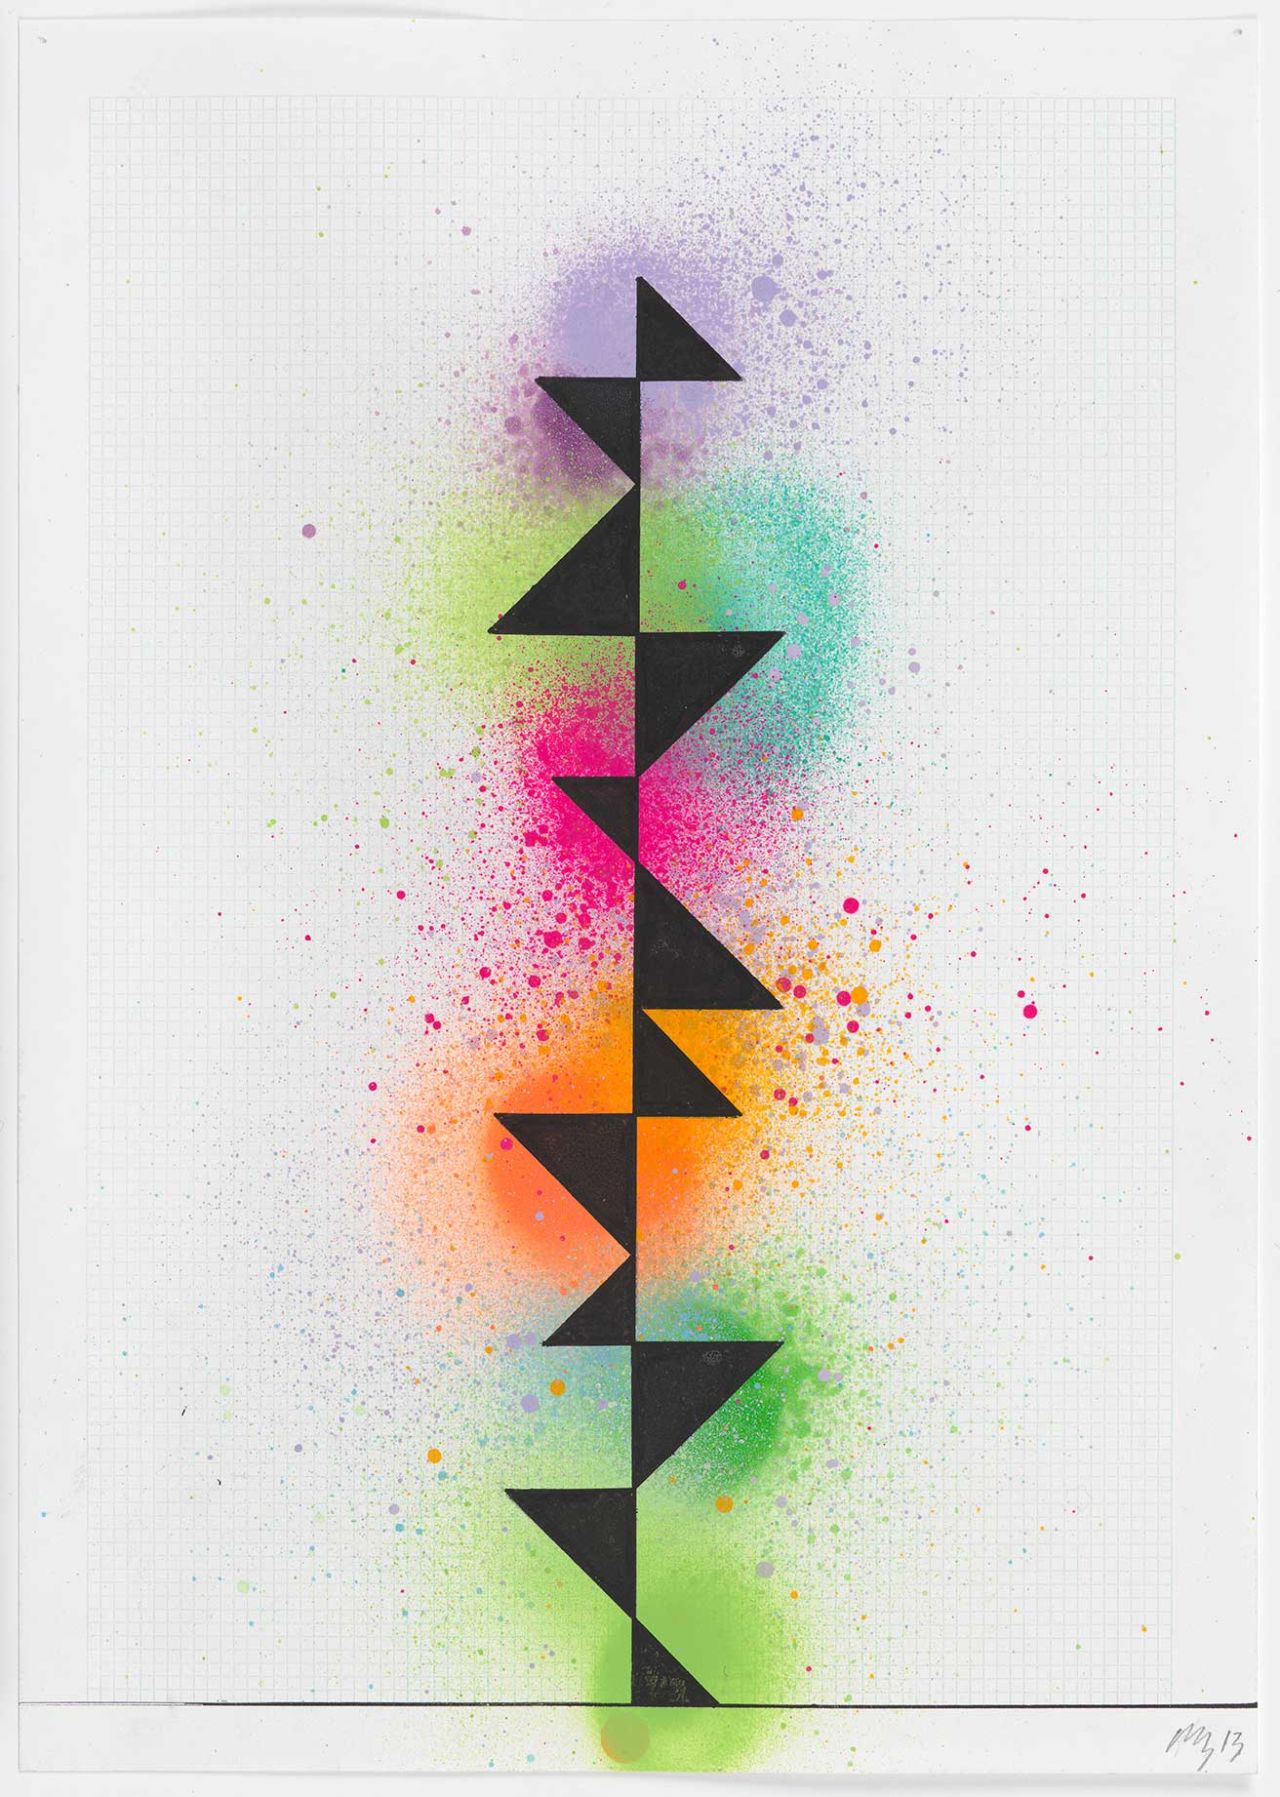 David Batchelor used spray paint, gouache and ink on graph paper to produce this untitled piece in 2013.